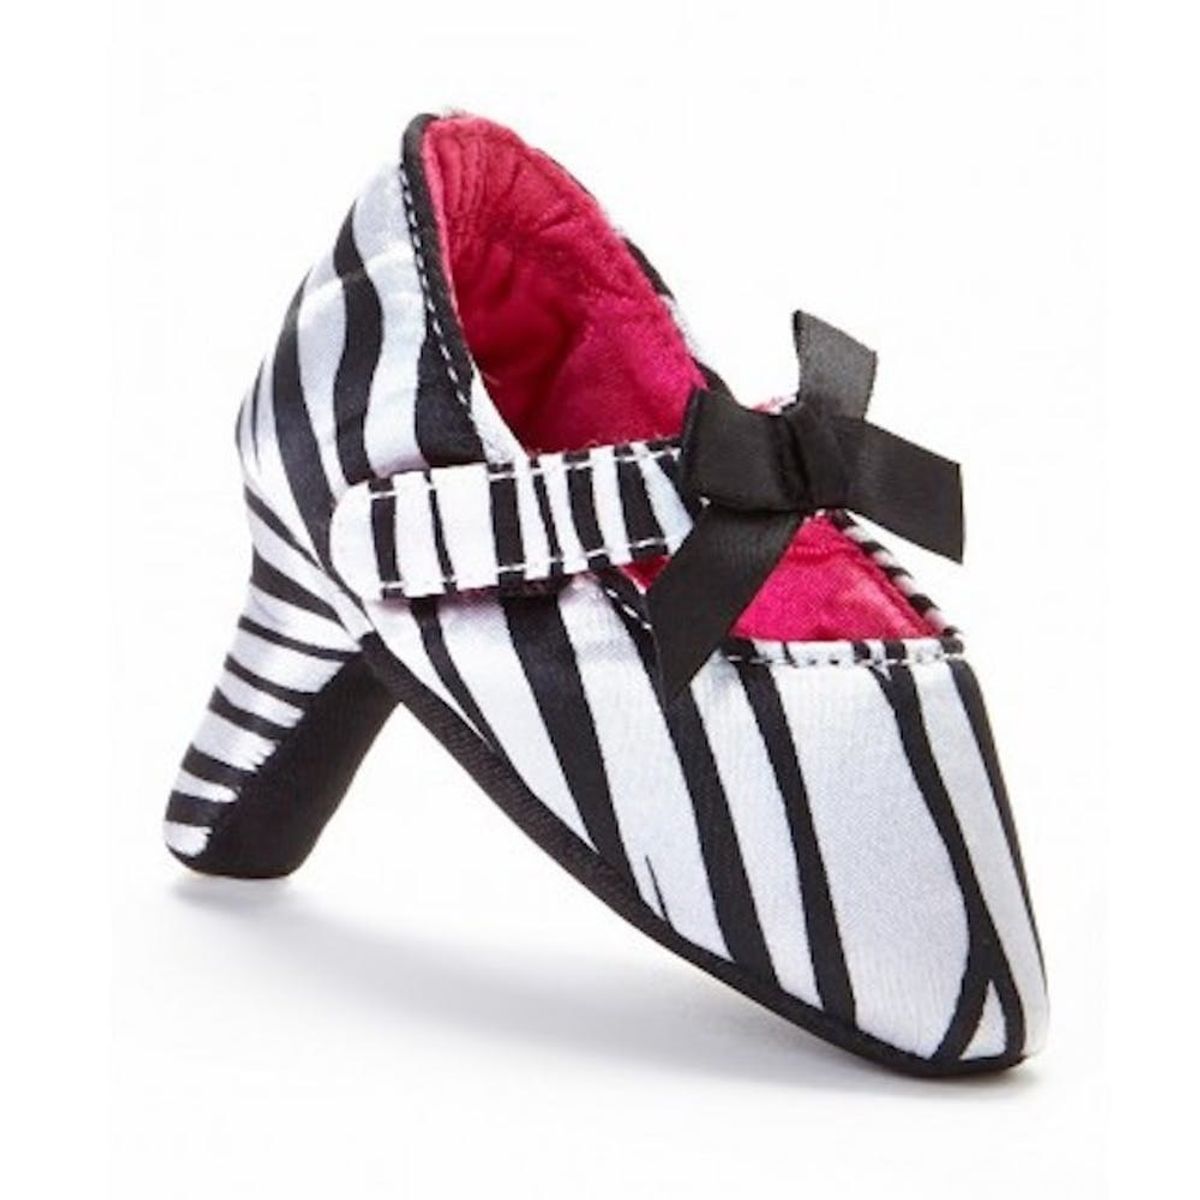 WTF: High-Heel Shoes for Babies Are an Actual Thing